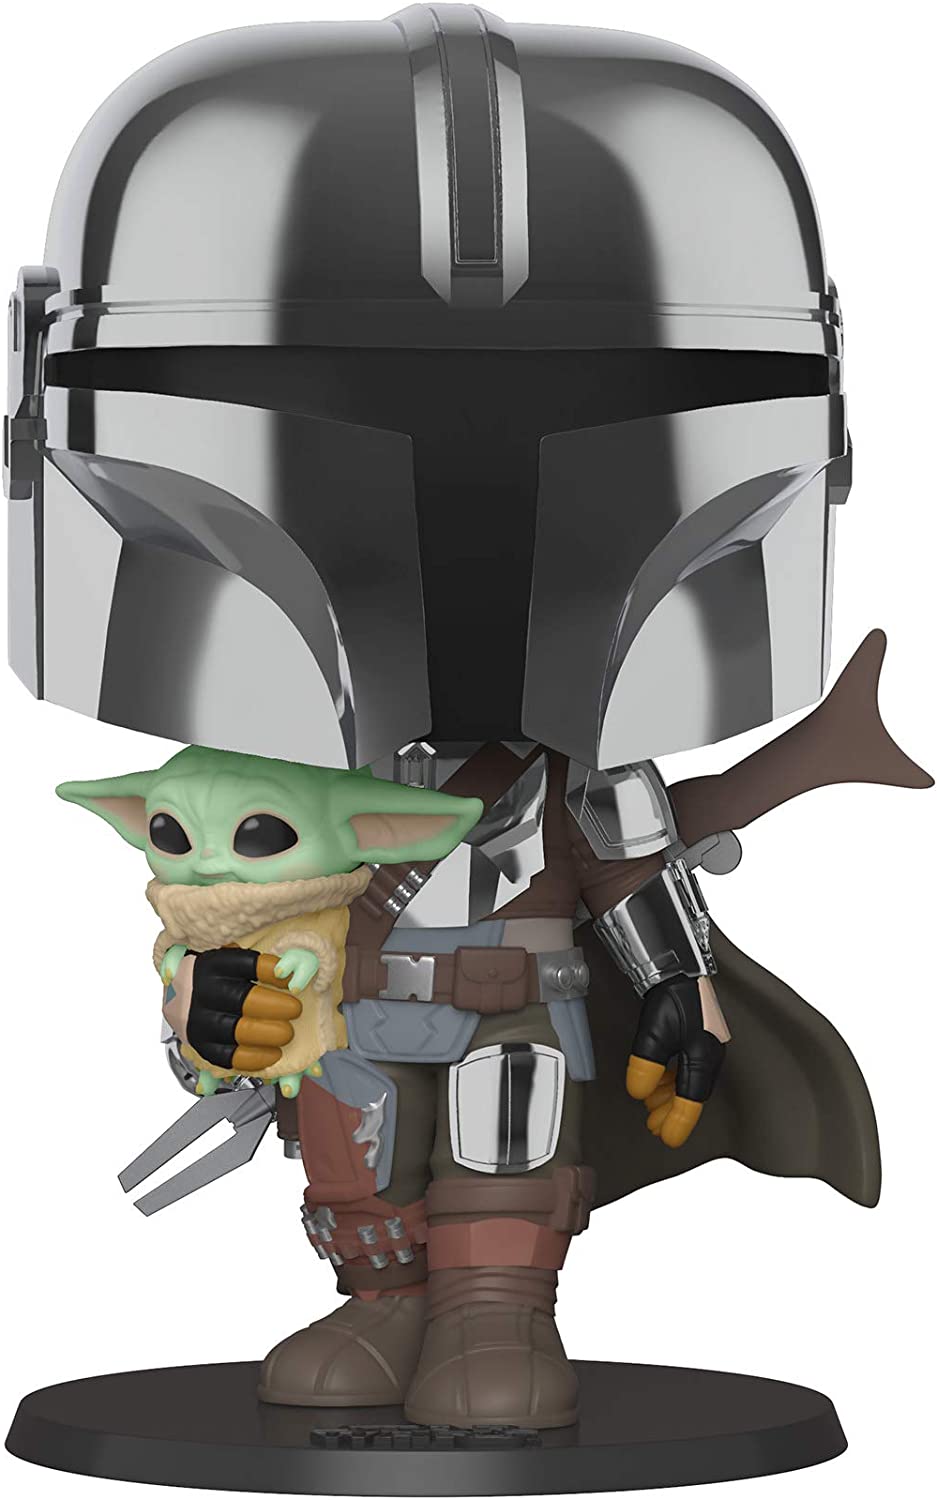 Star Wars The Mandalorian with Chrome Armour Carrying Baby Yoda 10" Pop! Vinyl Figure